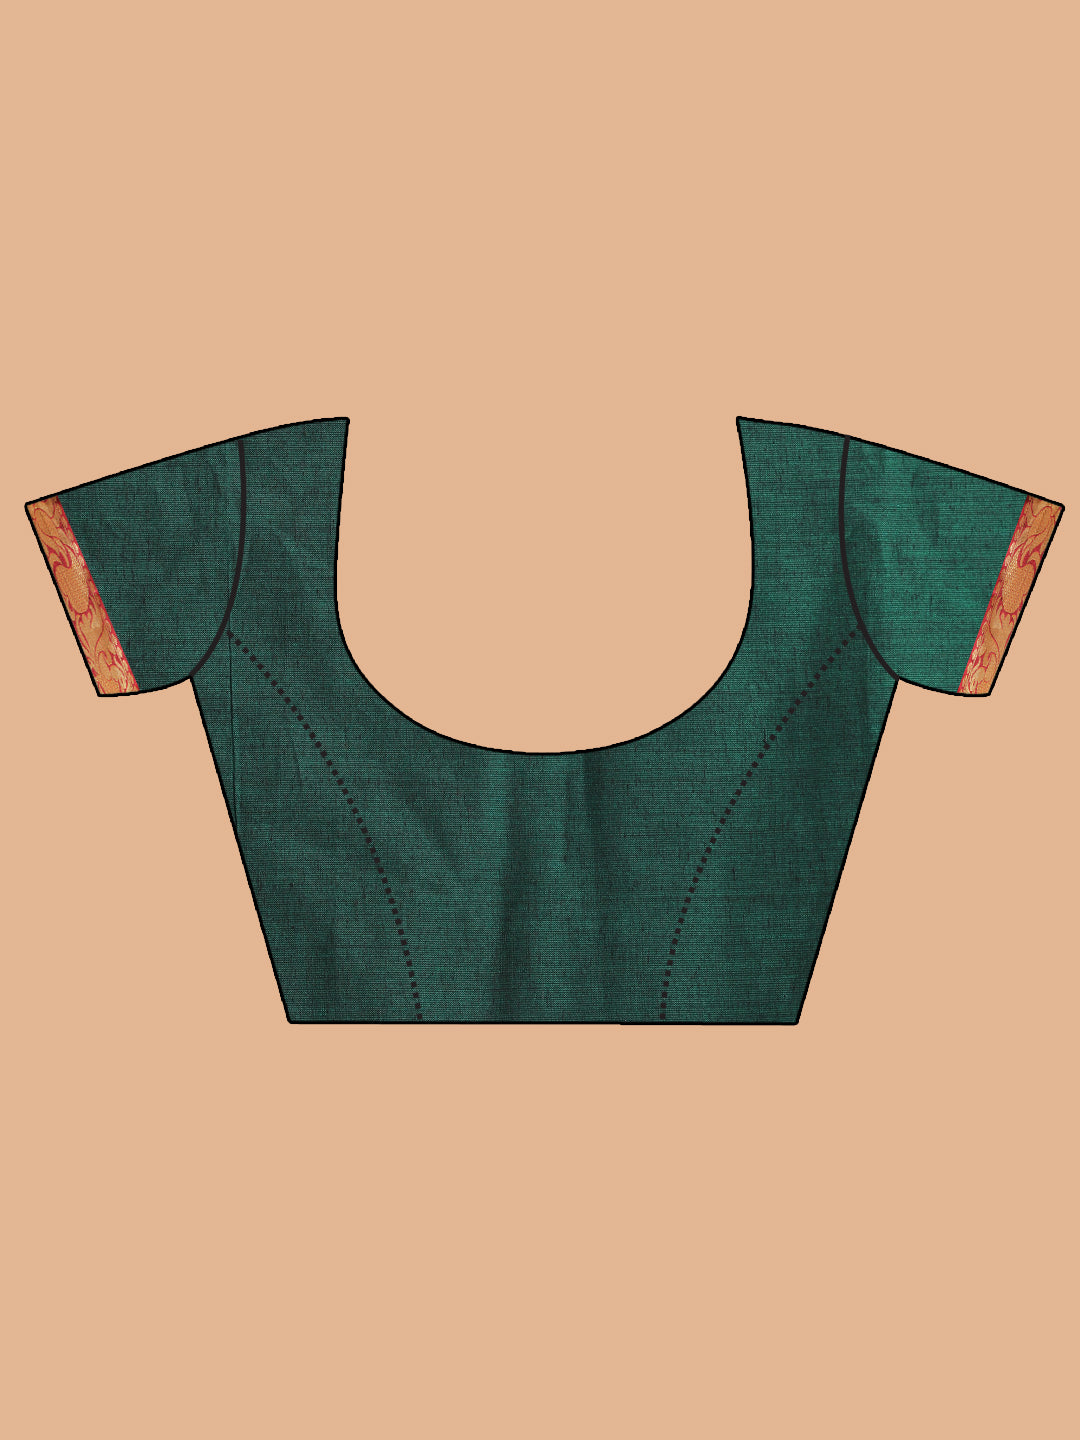 Indethnic Bottle Green Pure Cotton Woven Design Saree - Blouse Piece View